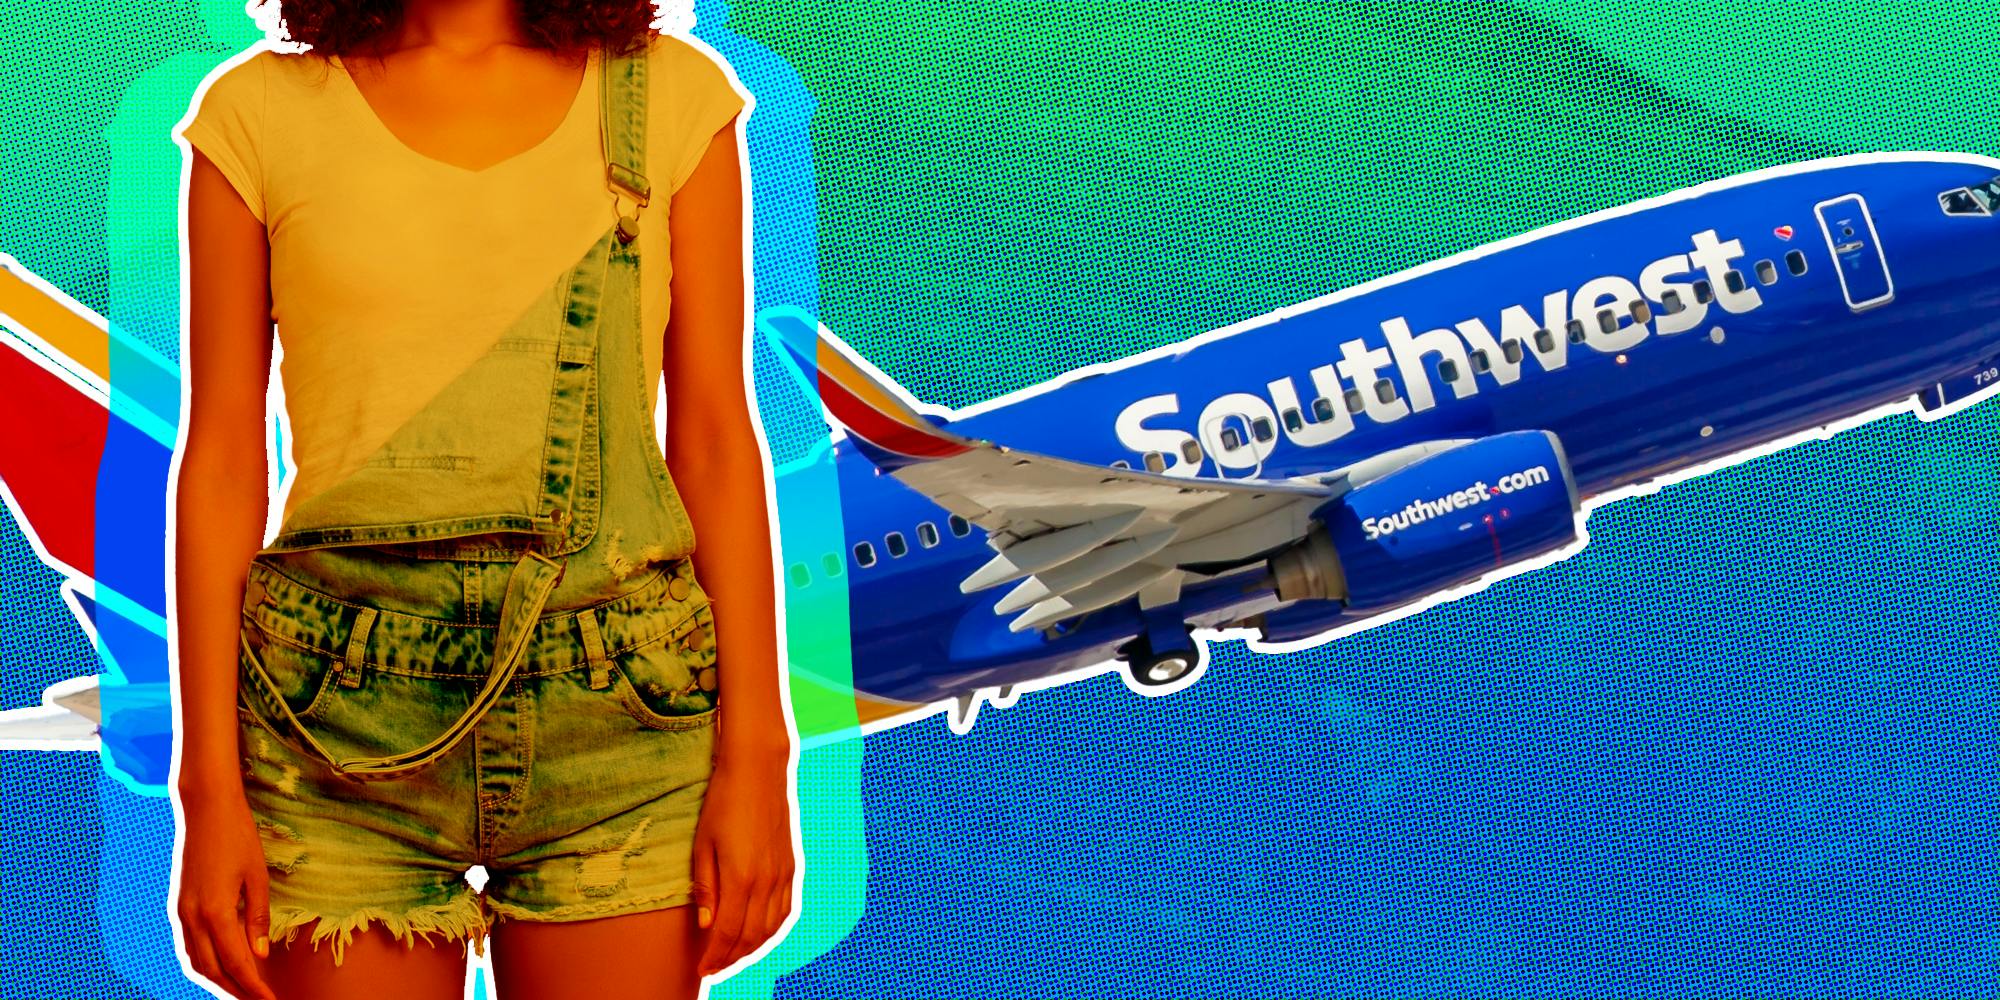 Woman wearing short overalls and southwest airline behind them